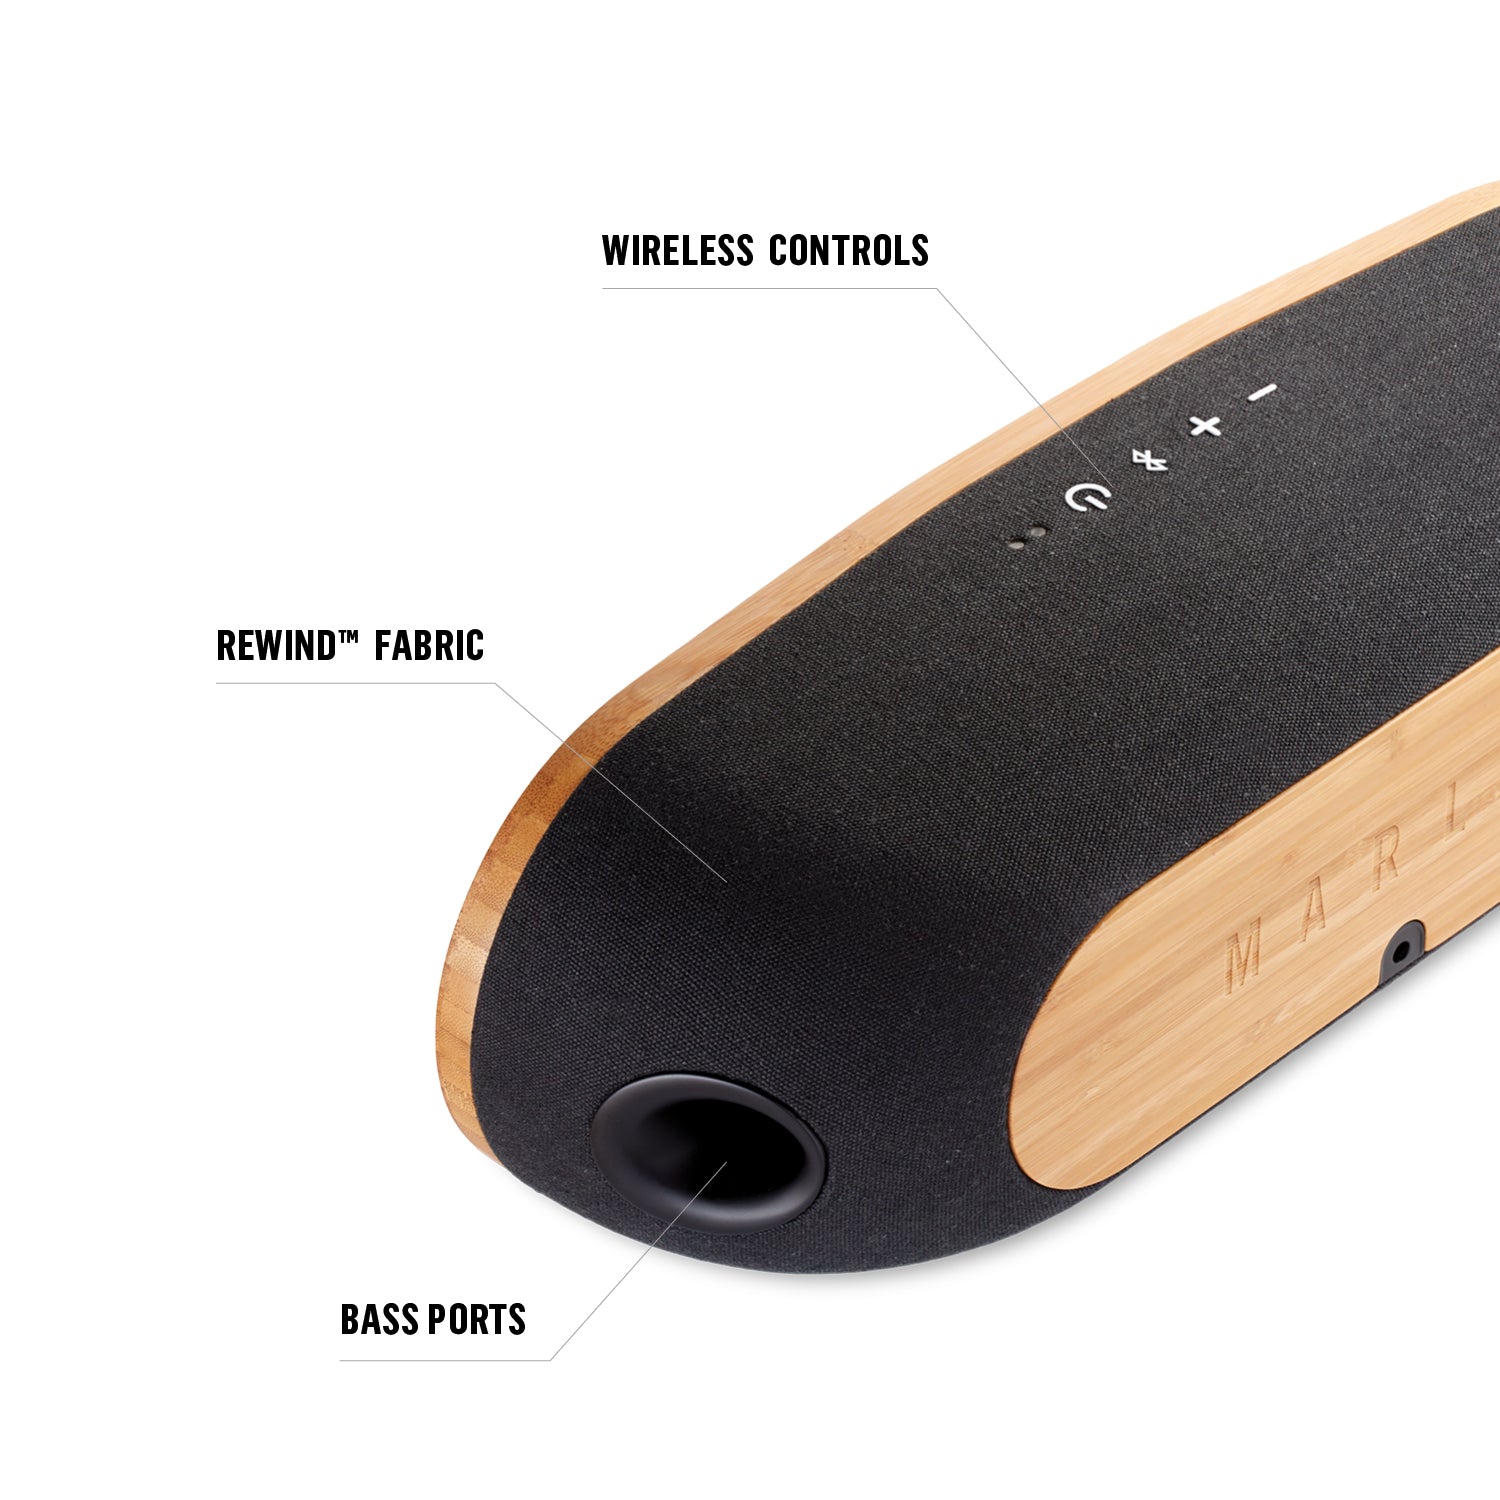 BAG OF RIDDIM 2 PORTABLE AUDIO SYSTEM – House of Marley Cyprus